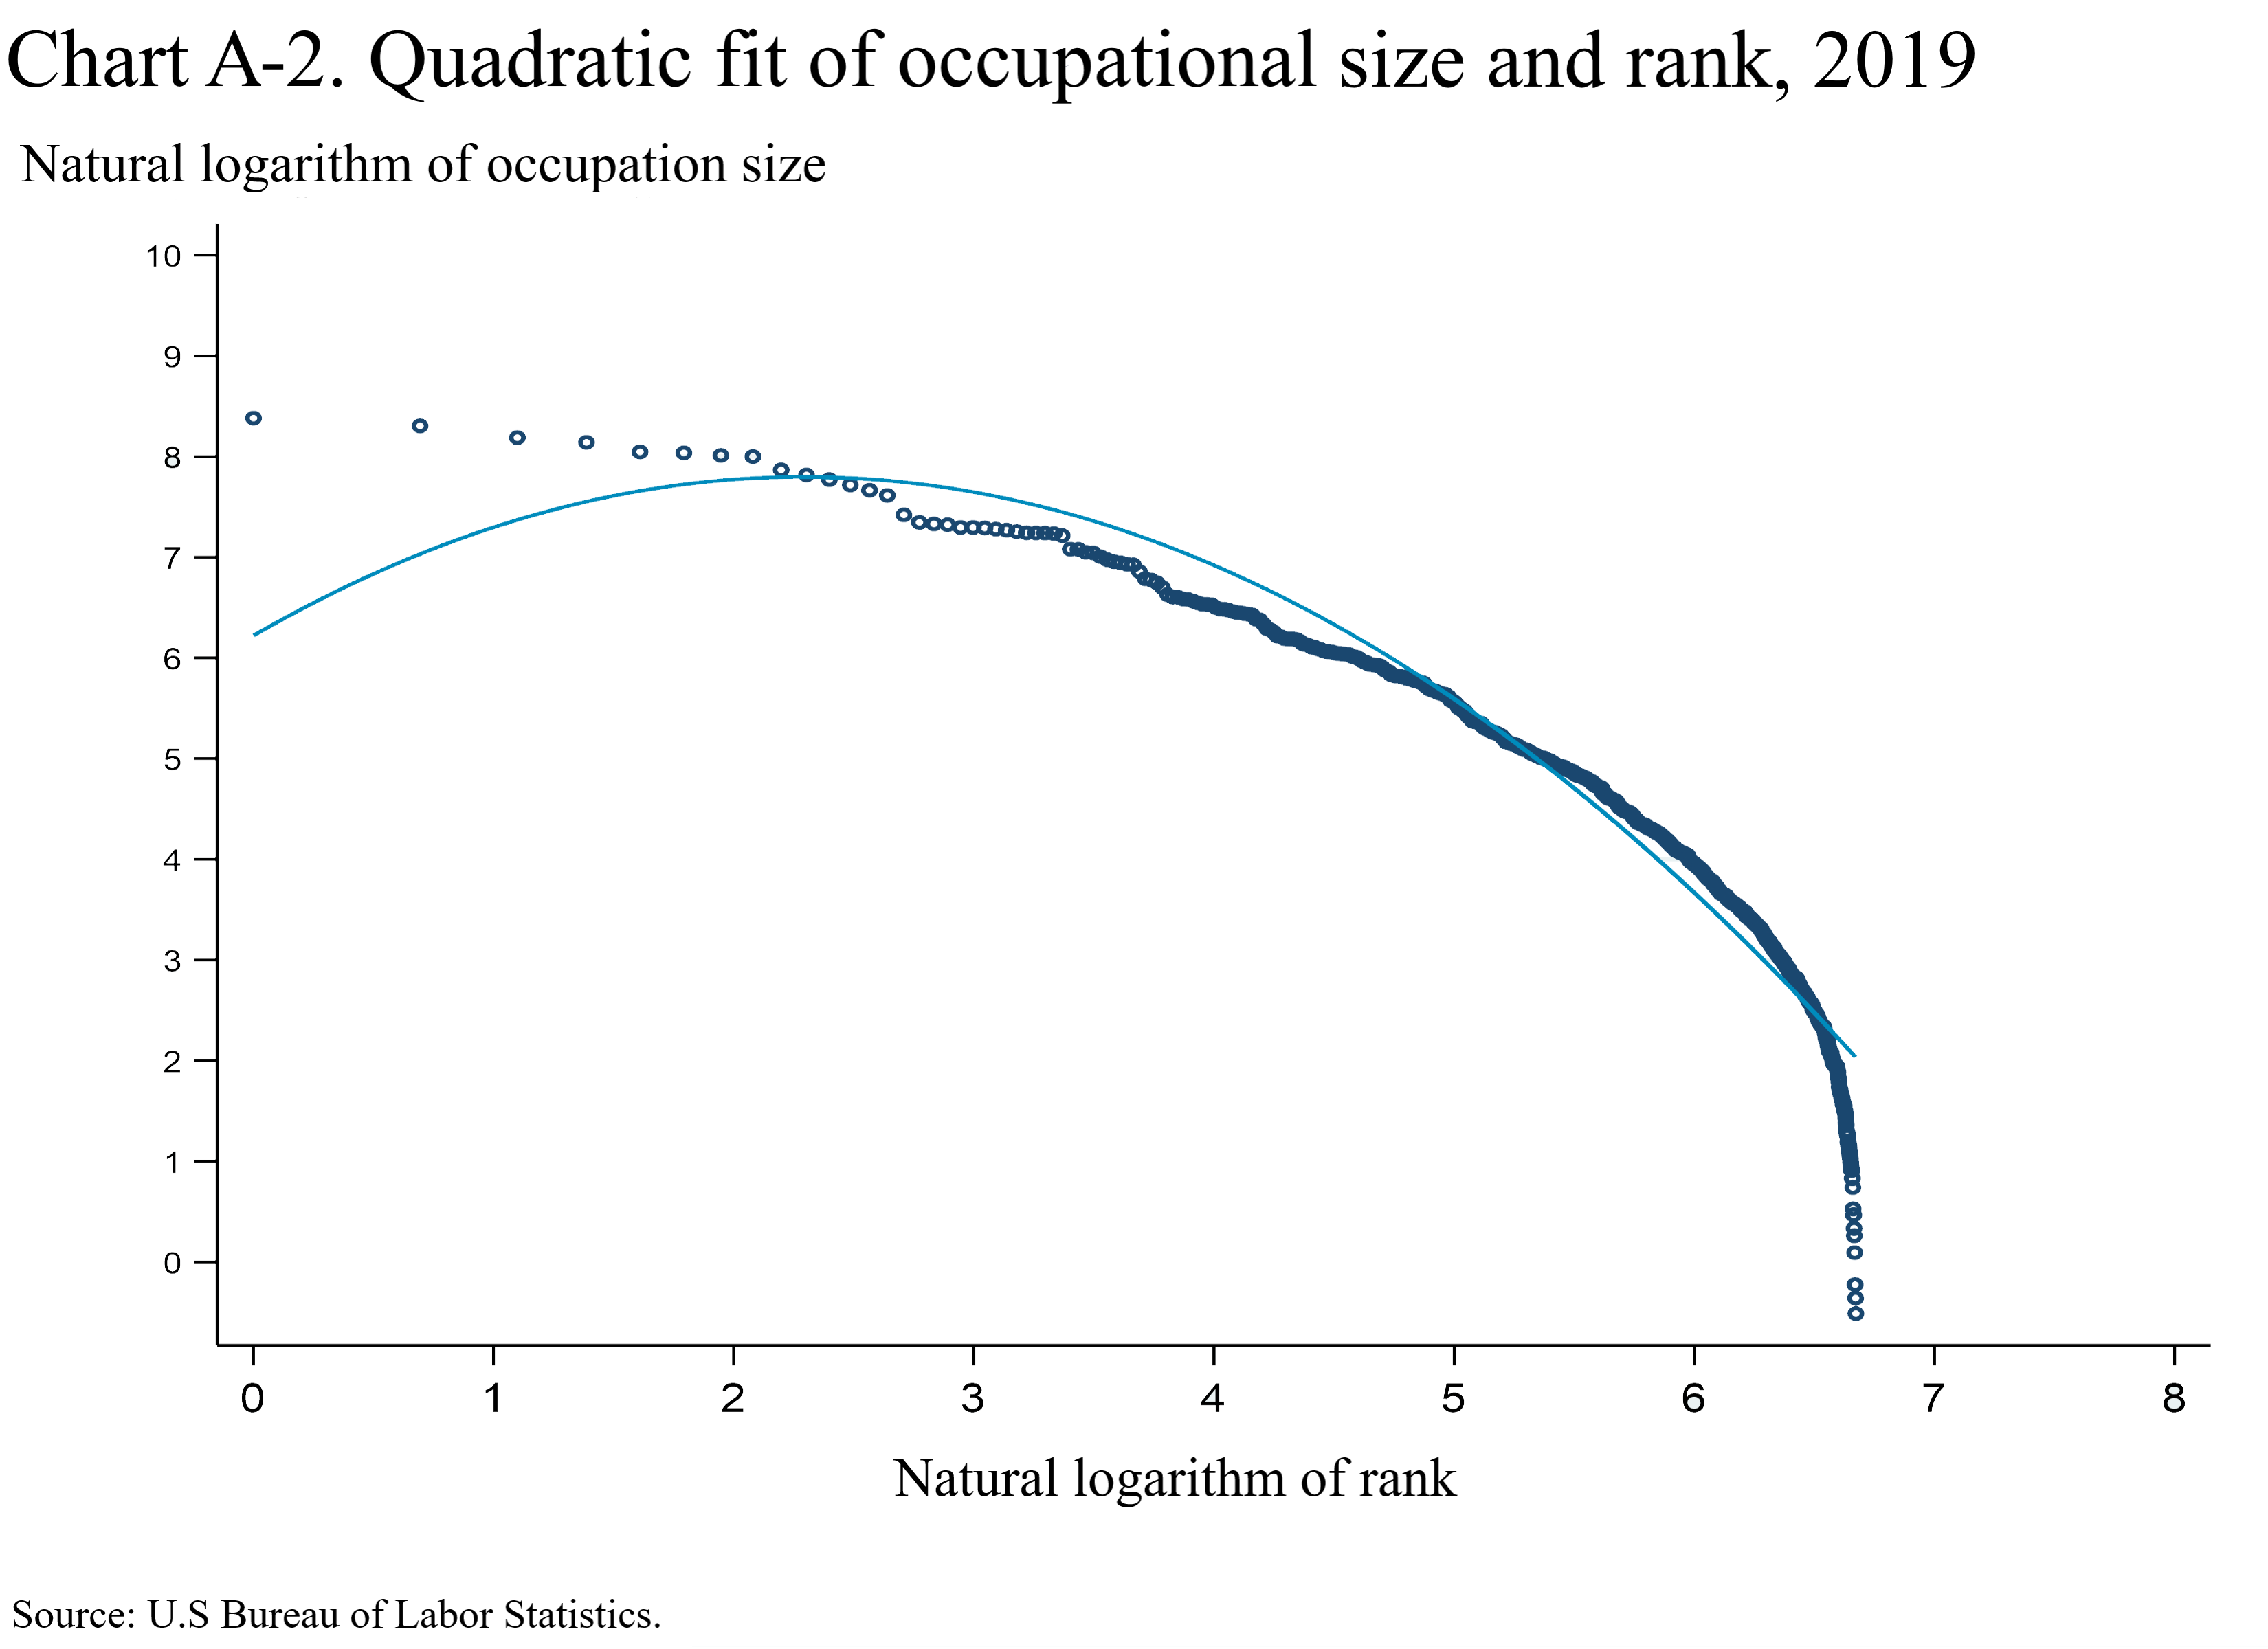 Chart A-2. Quadratic fit of occupation size and rank. The quadratic fit is also poor.